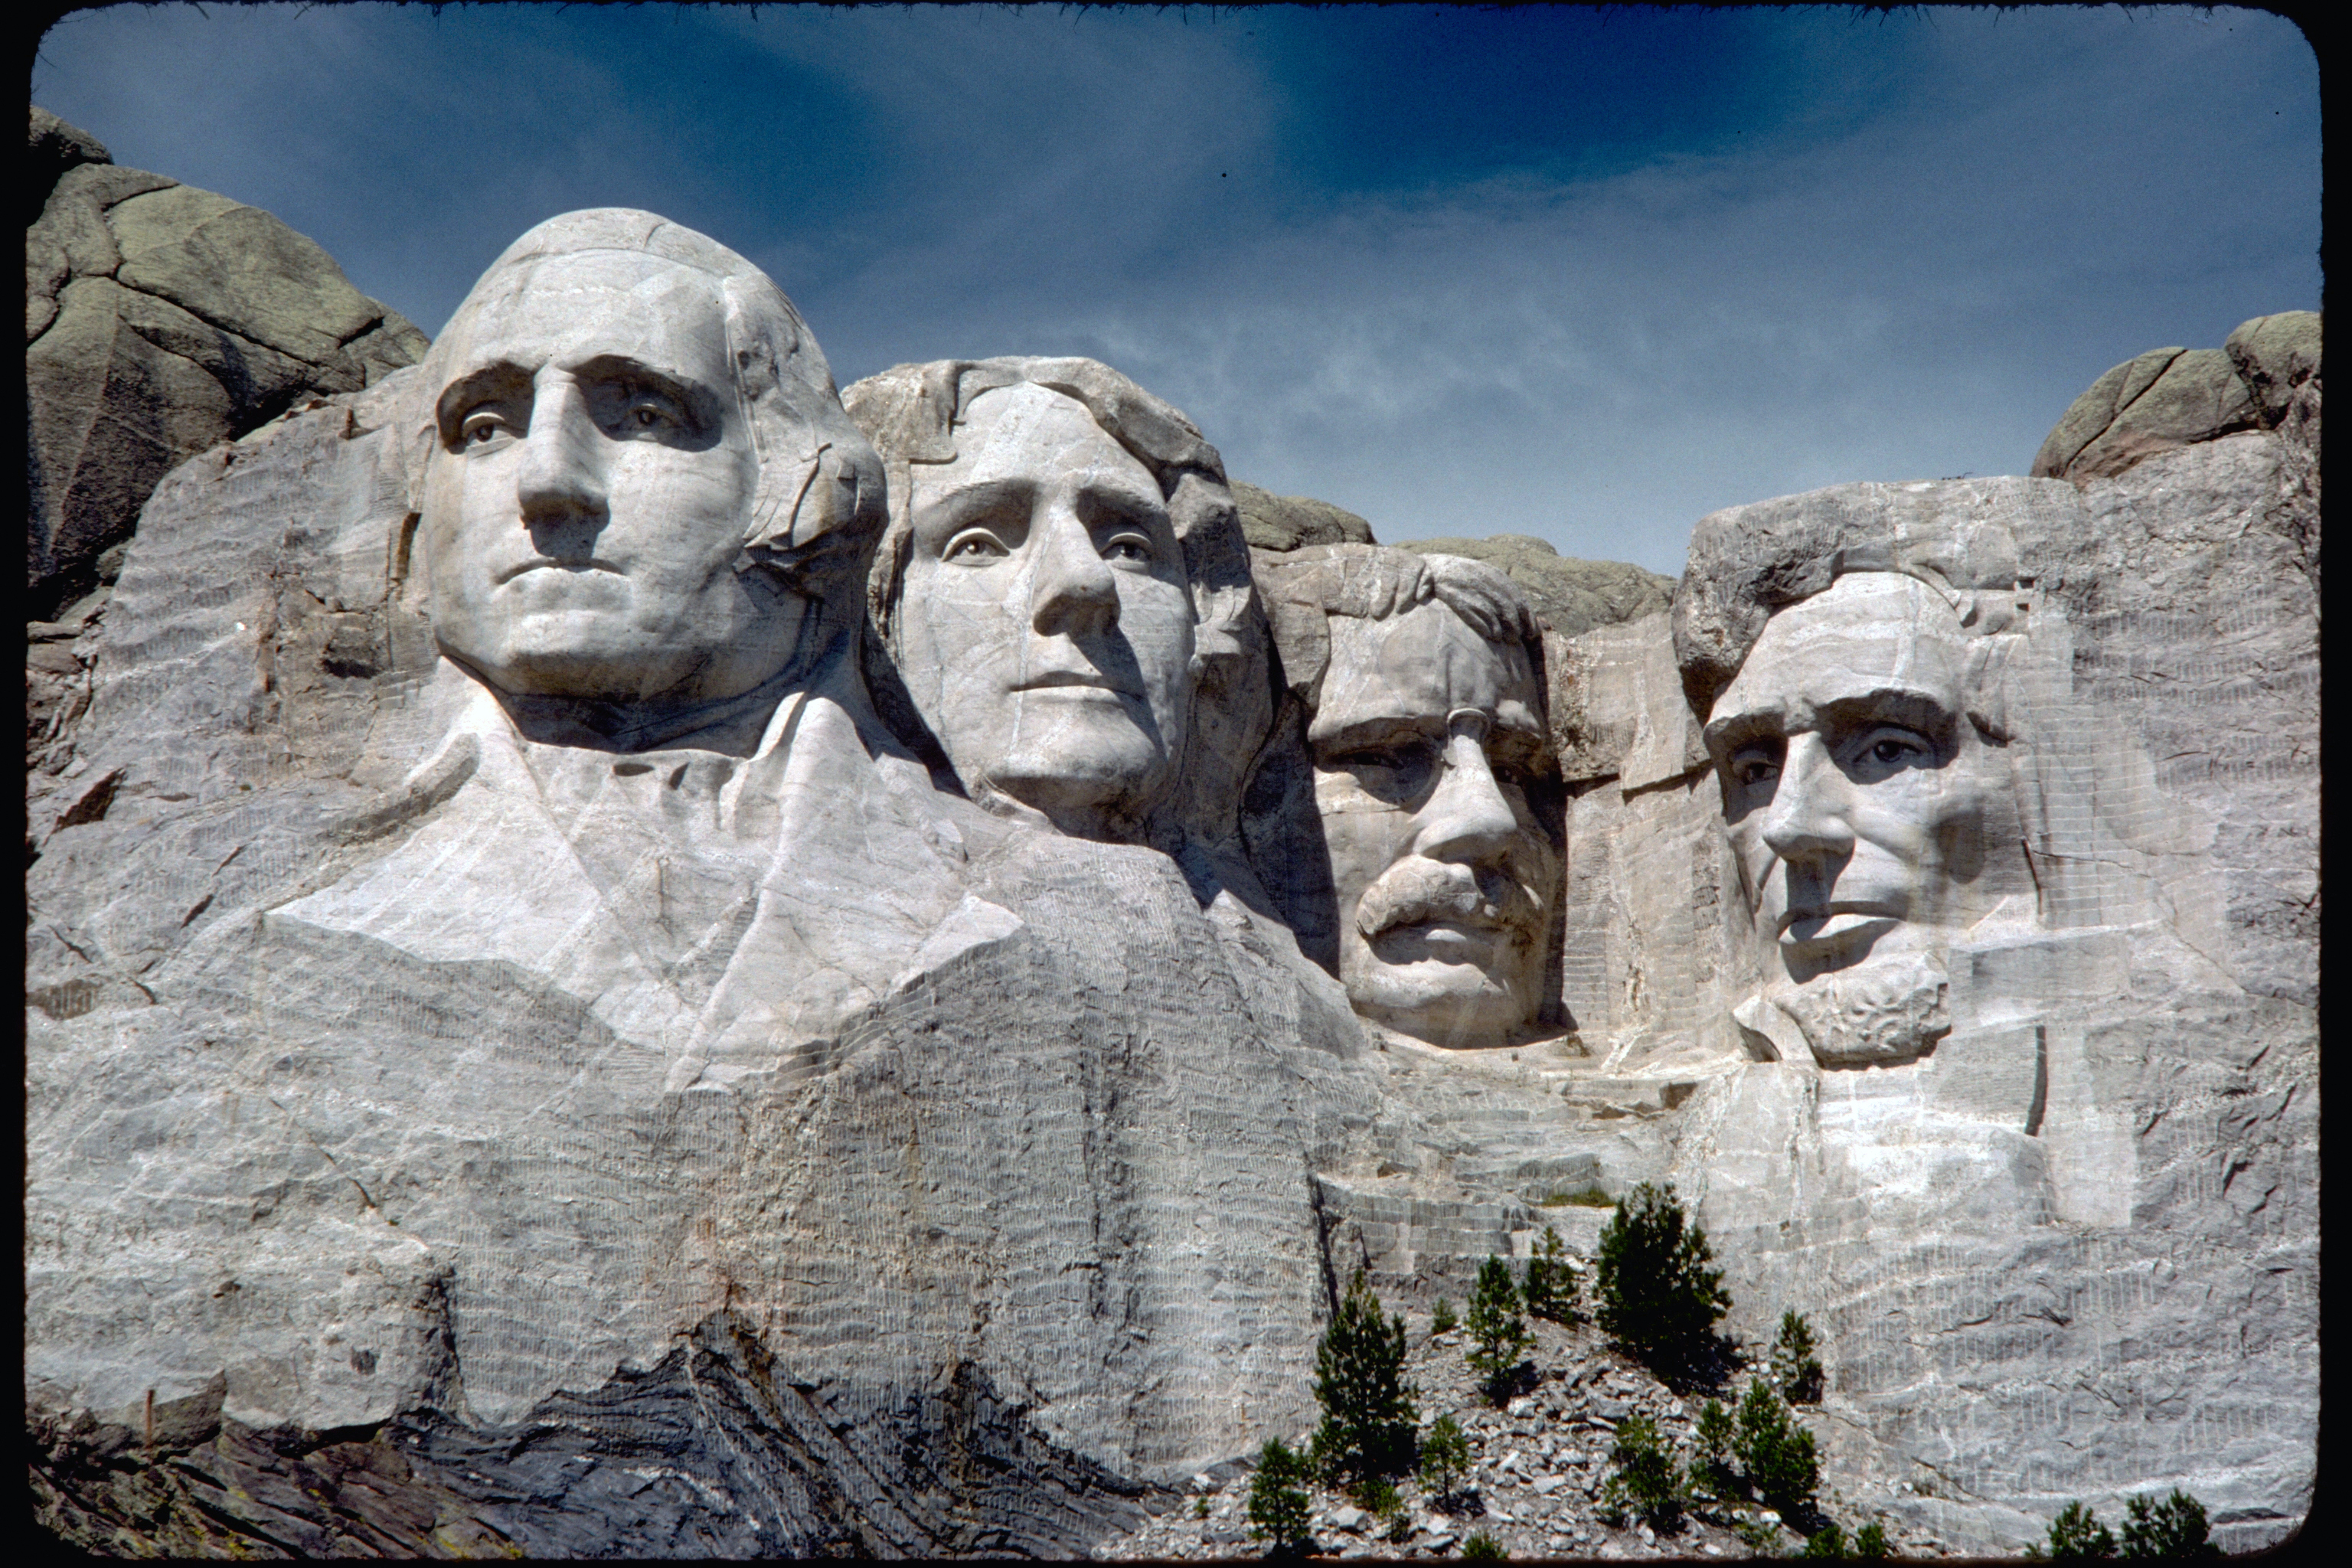 Mount Rushmore National Monument. Photo courtesy of National Park Service Digital Image Archives.